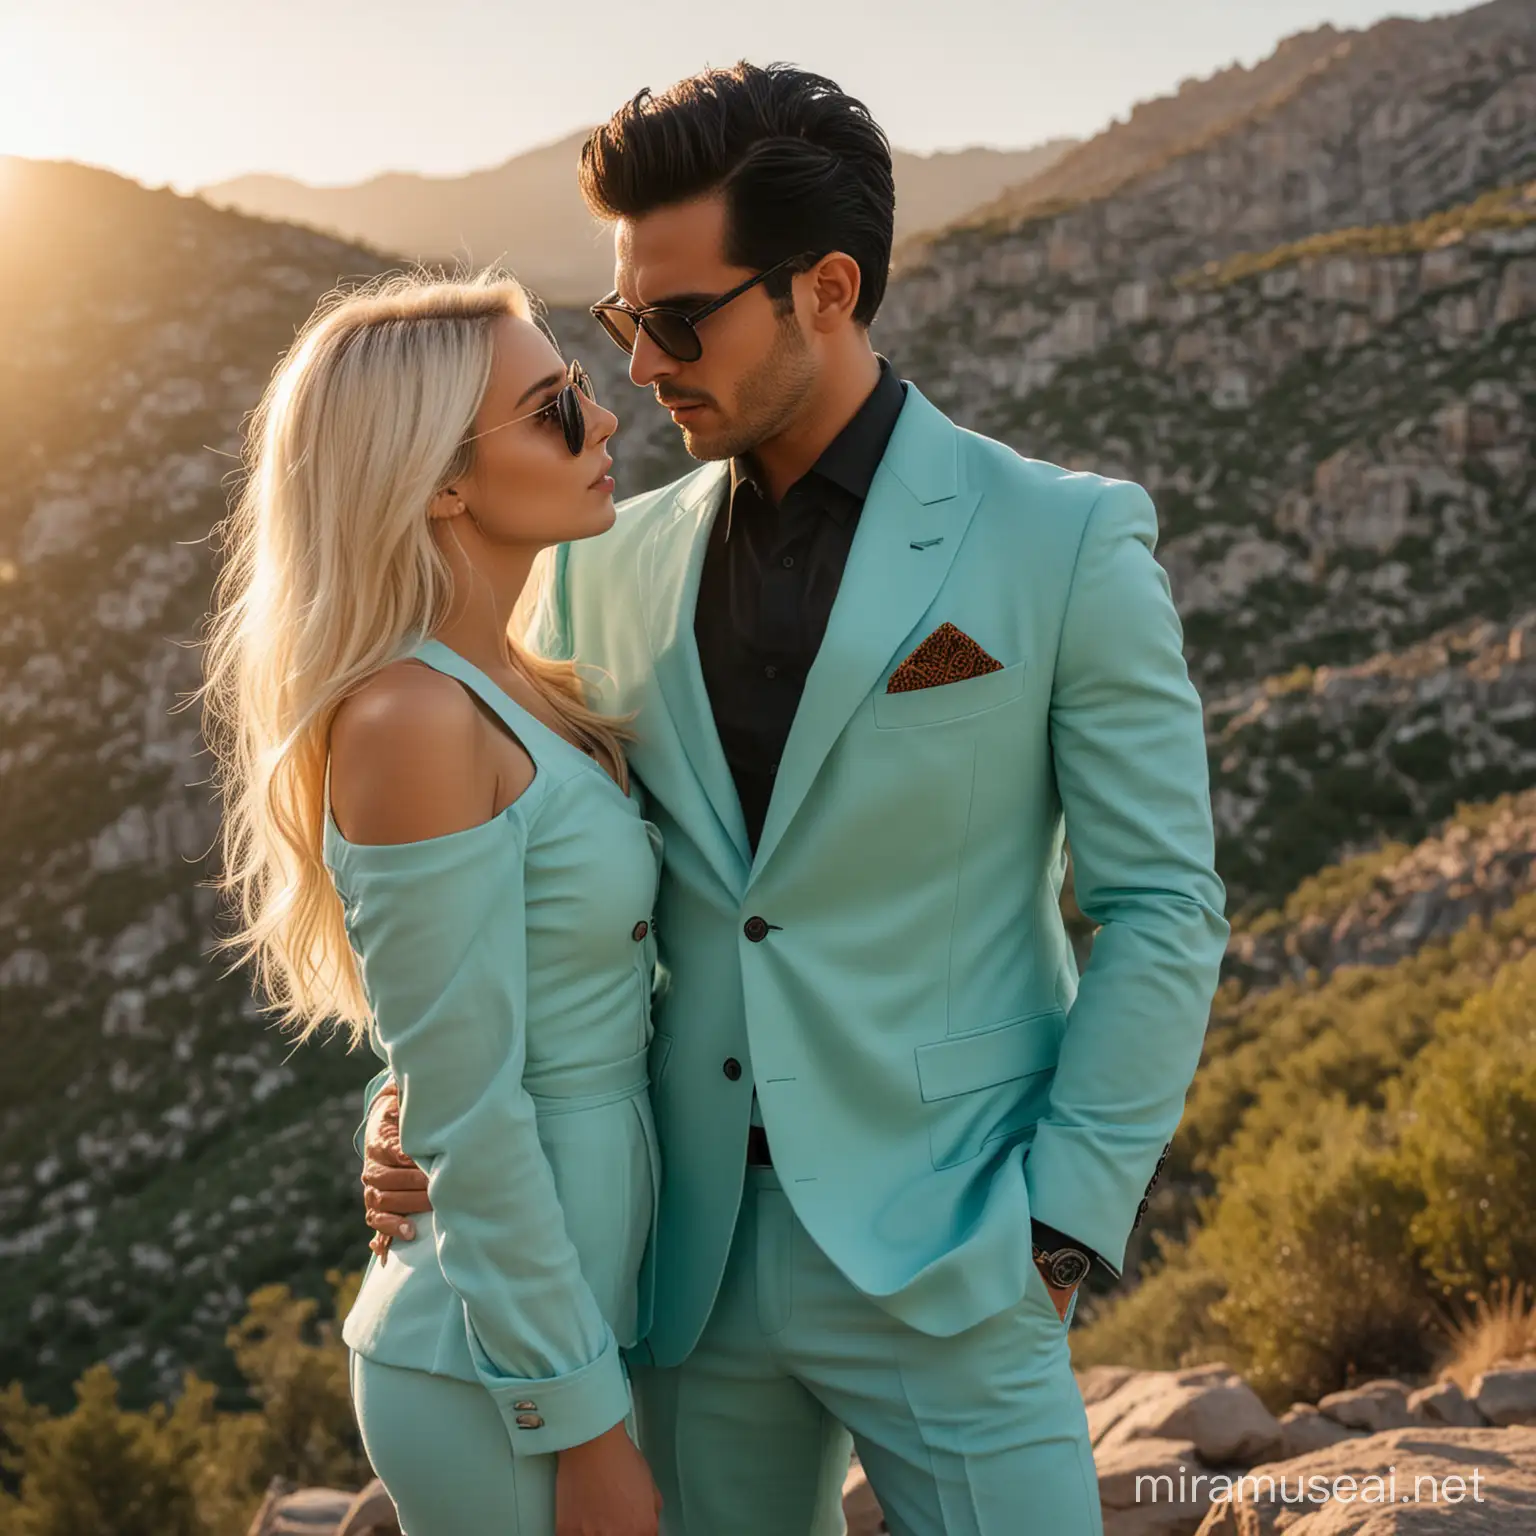 A handsome and elegant man with black hair, light beard, and sunglasses, wearing a turquoise suit, with a beautiful blonde girl in a mountainous place at sunset, looking at each other romantically.